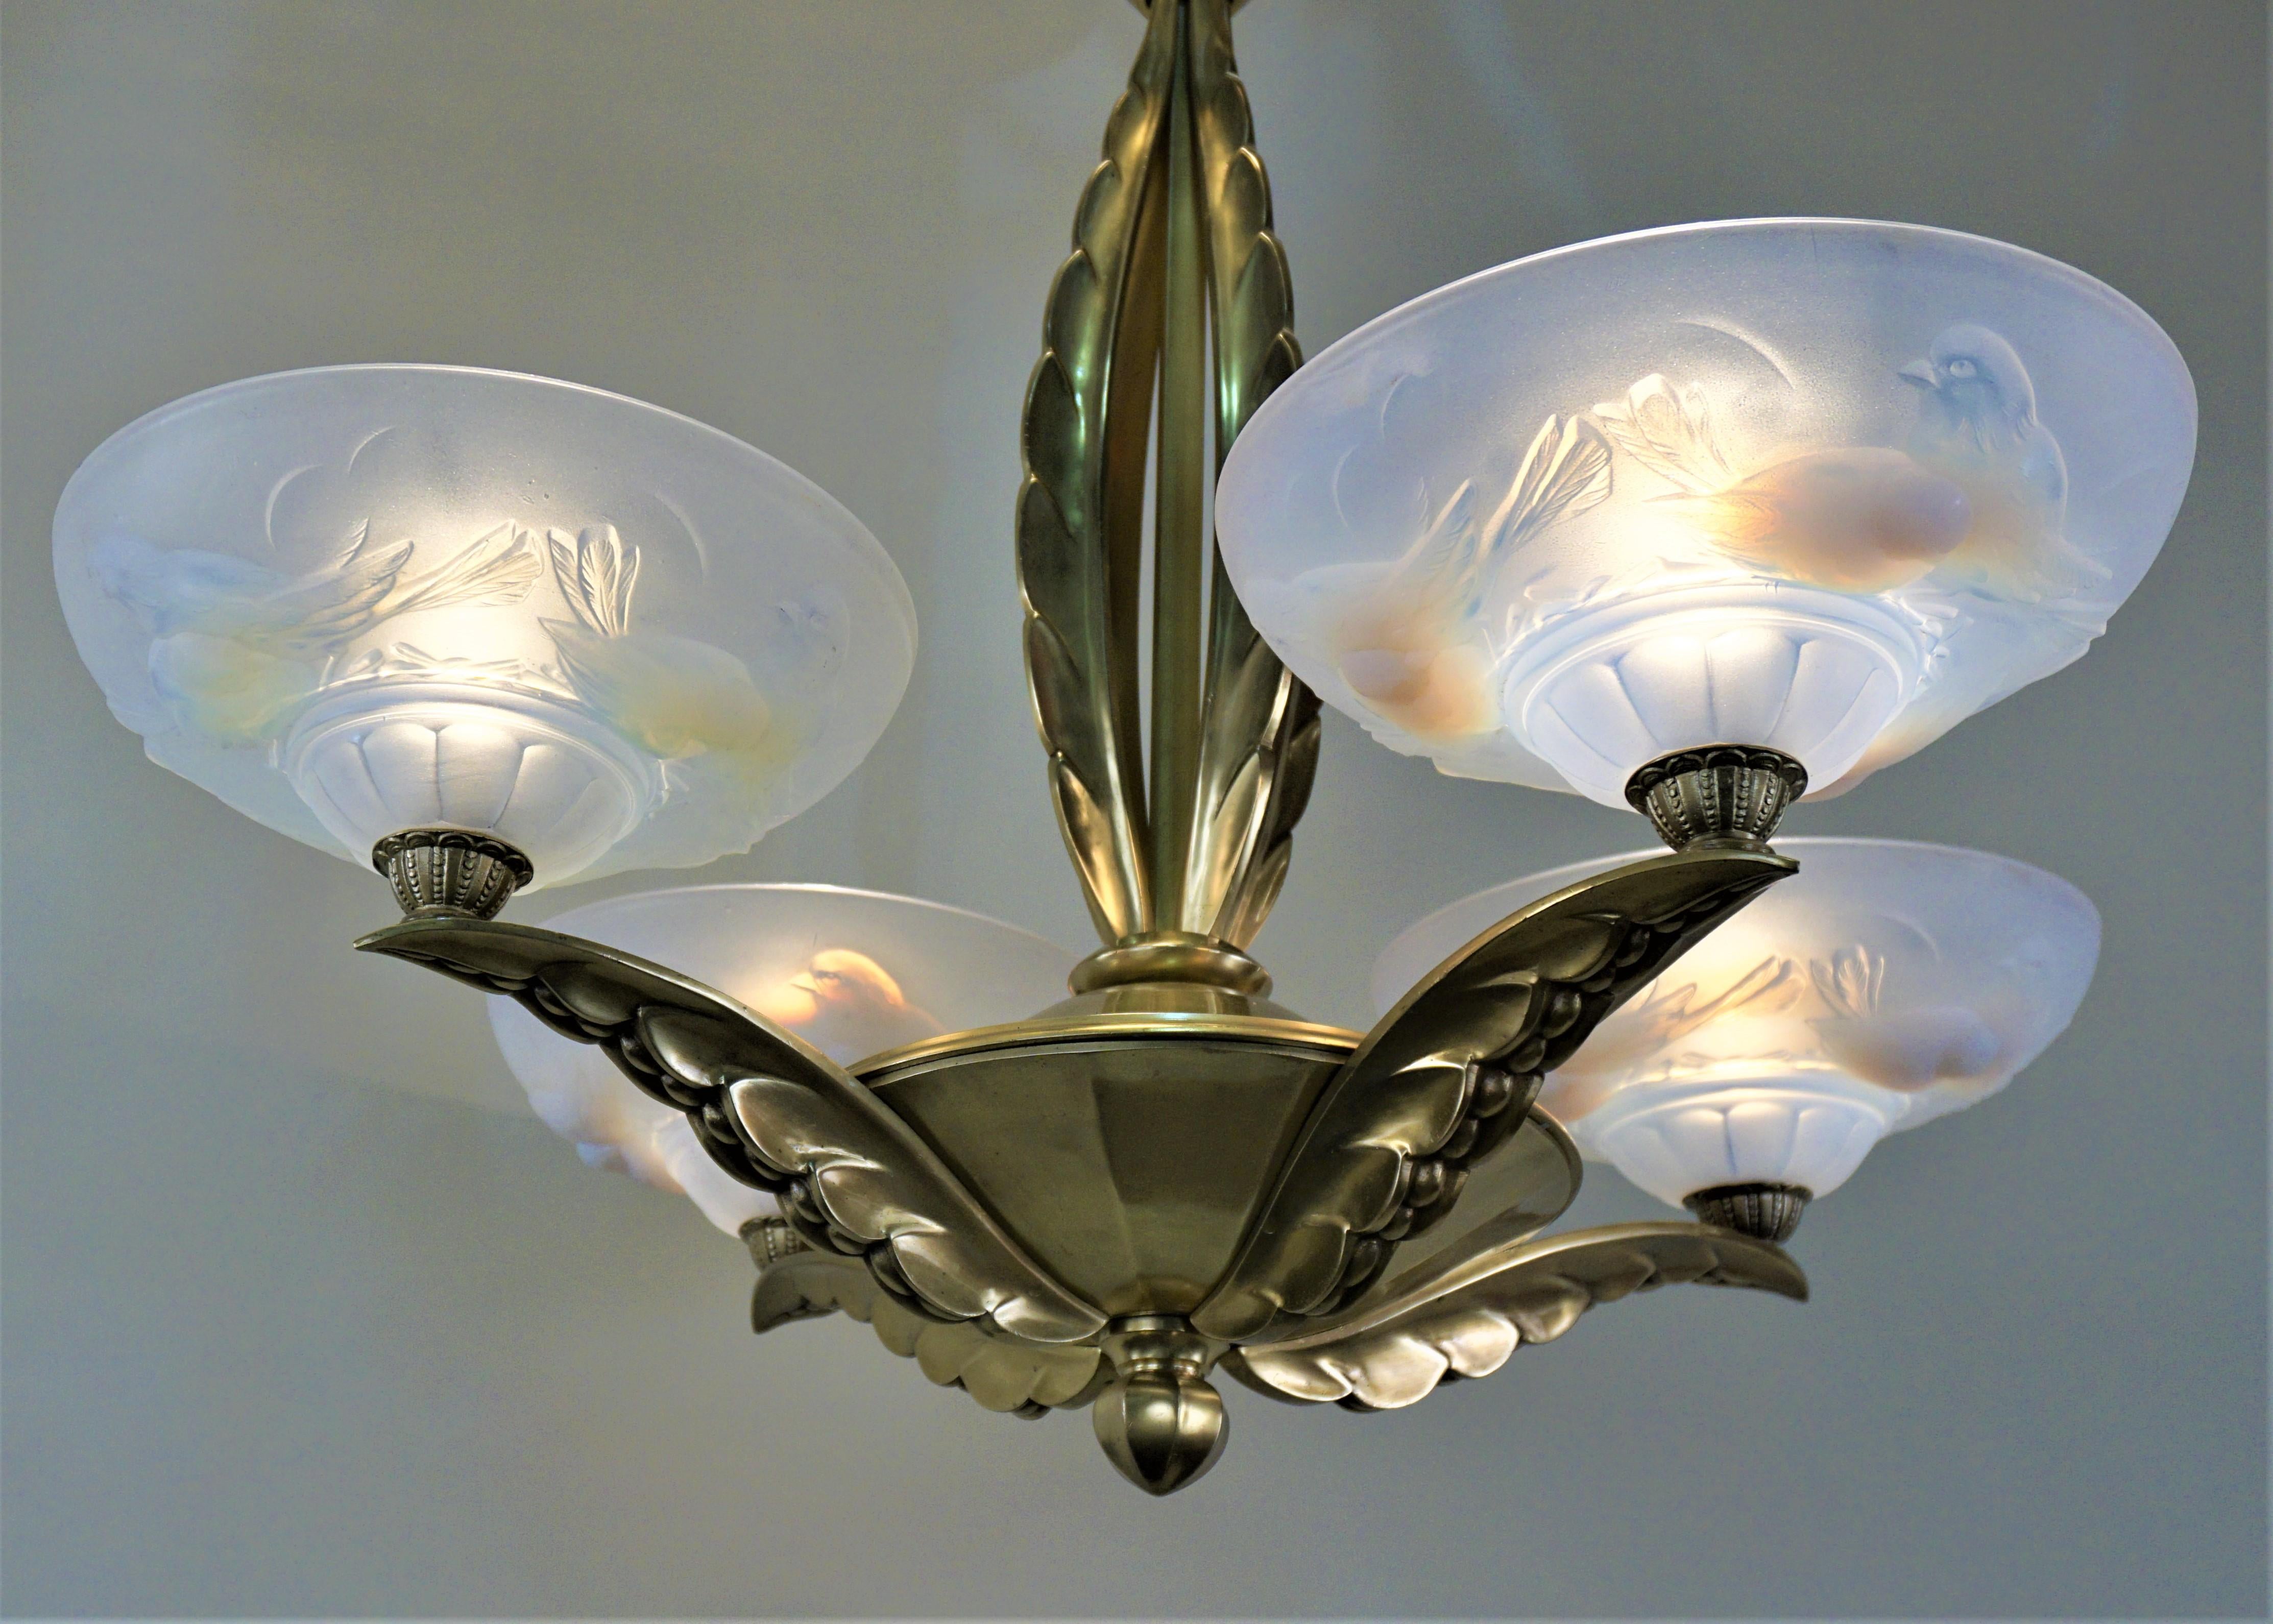 Opalescent glass with bronze frame chandelier by Ezan and Petitot. 
Height can be reduced by removing some of the chain.